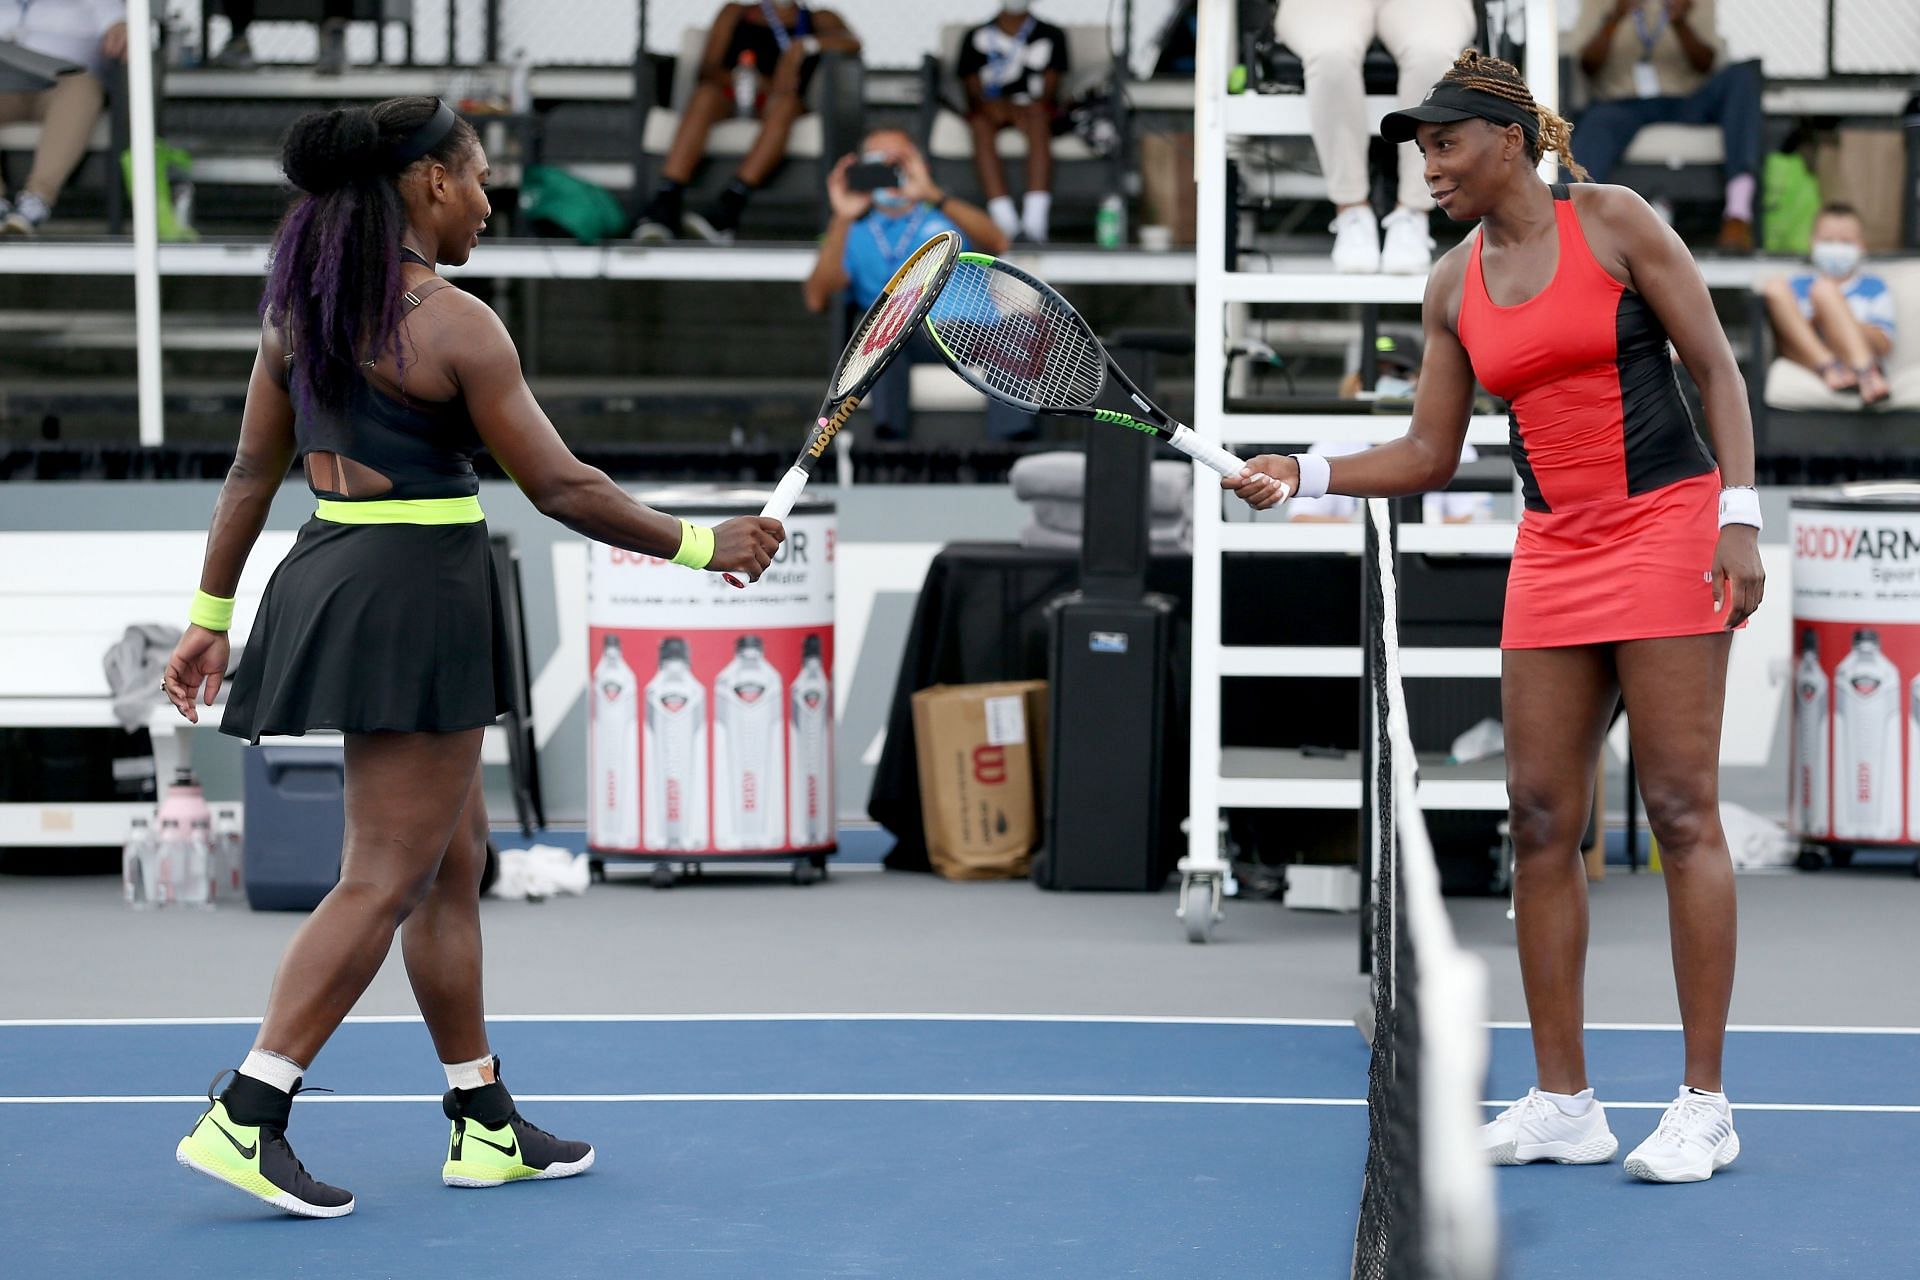 Venus and Serena Williams at the Top Seed Open